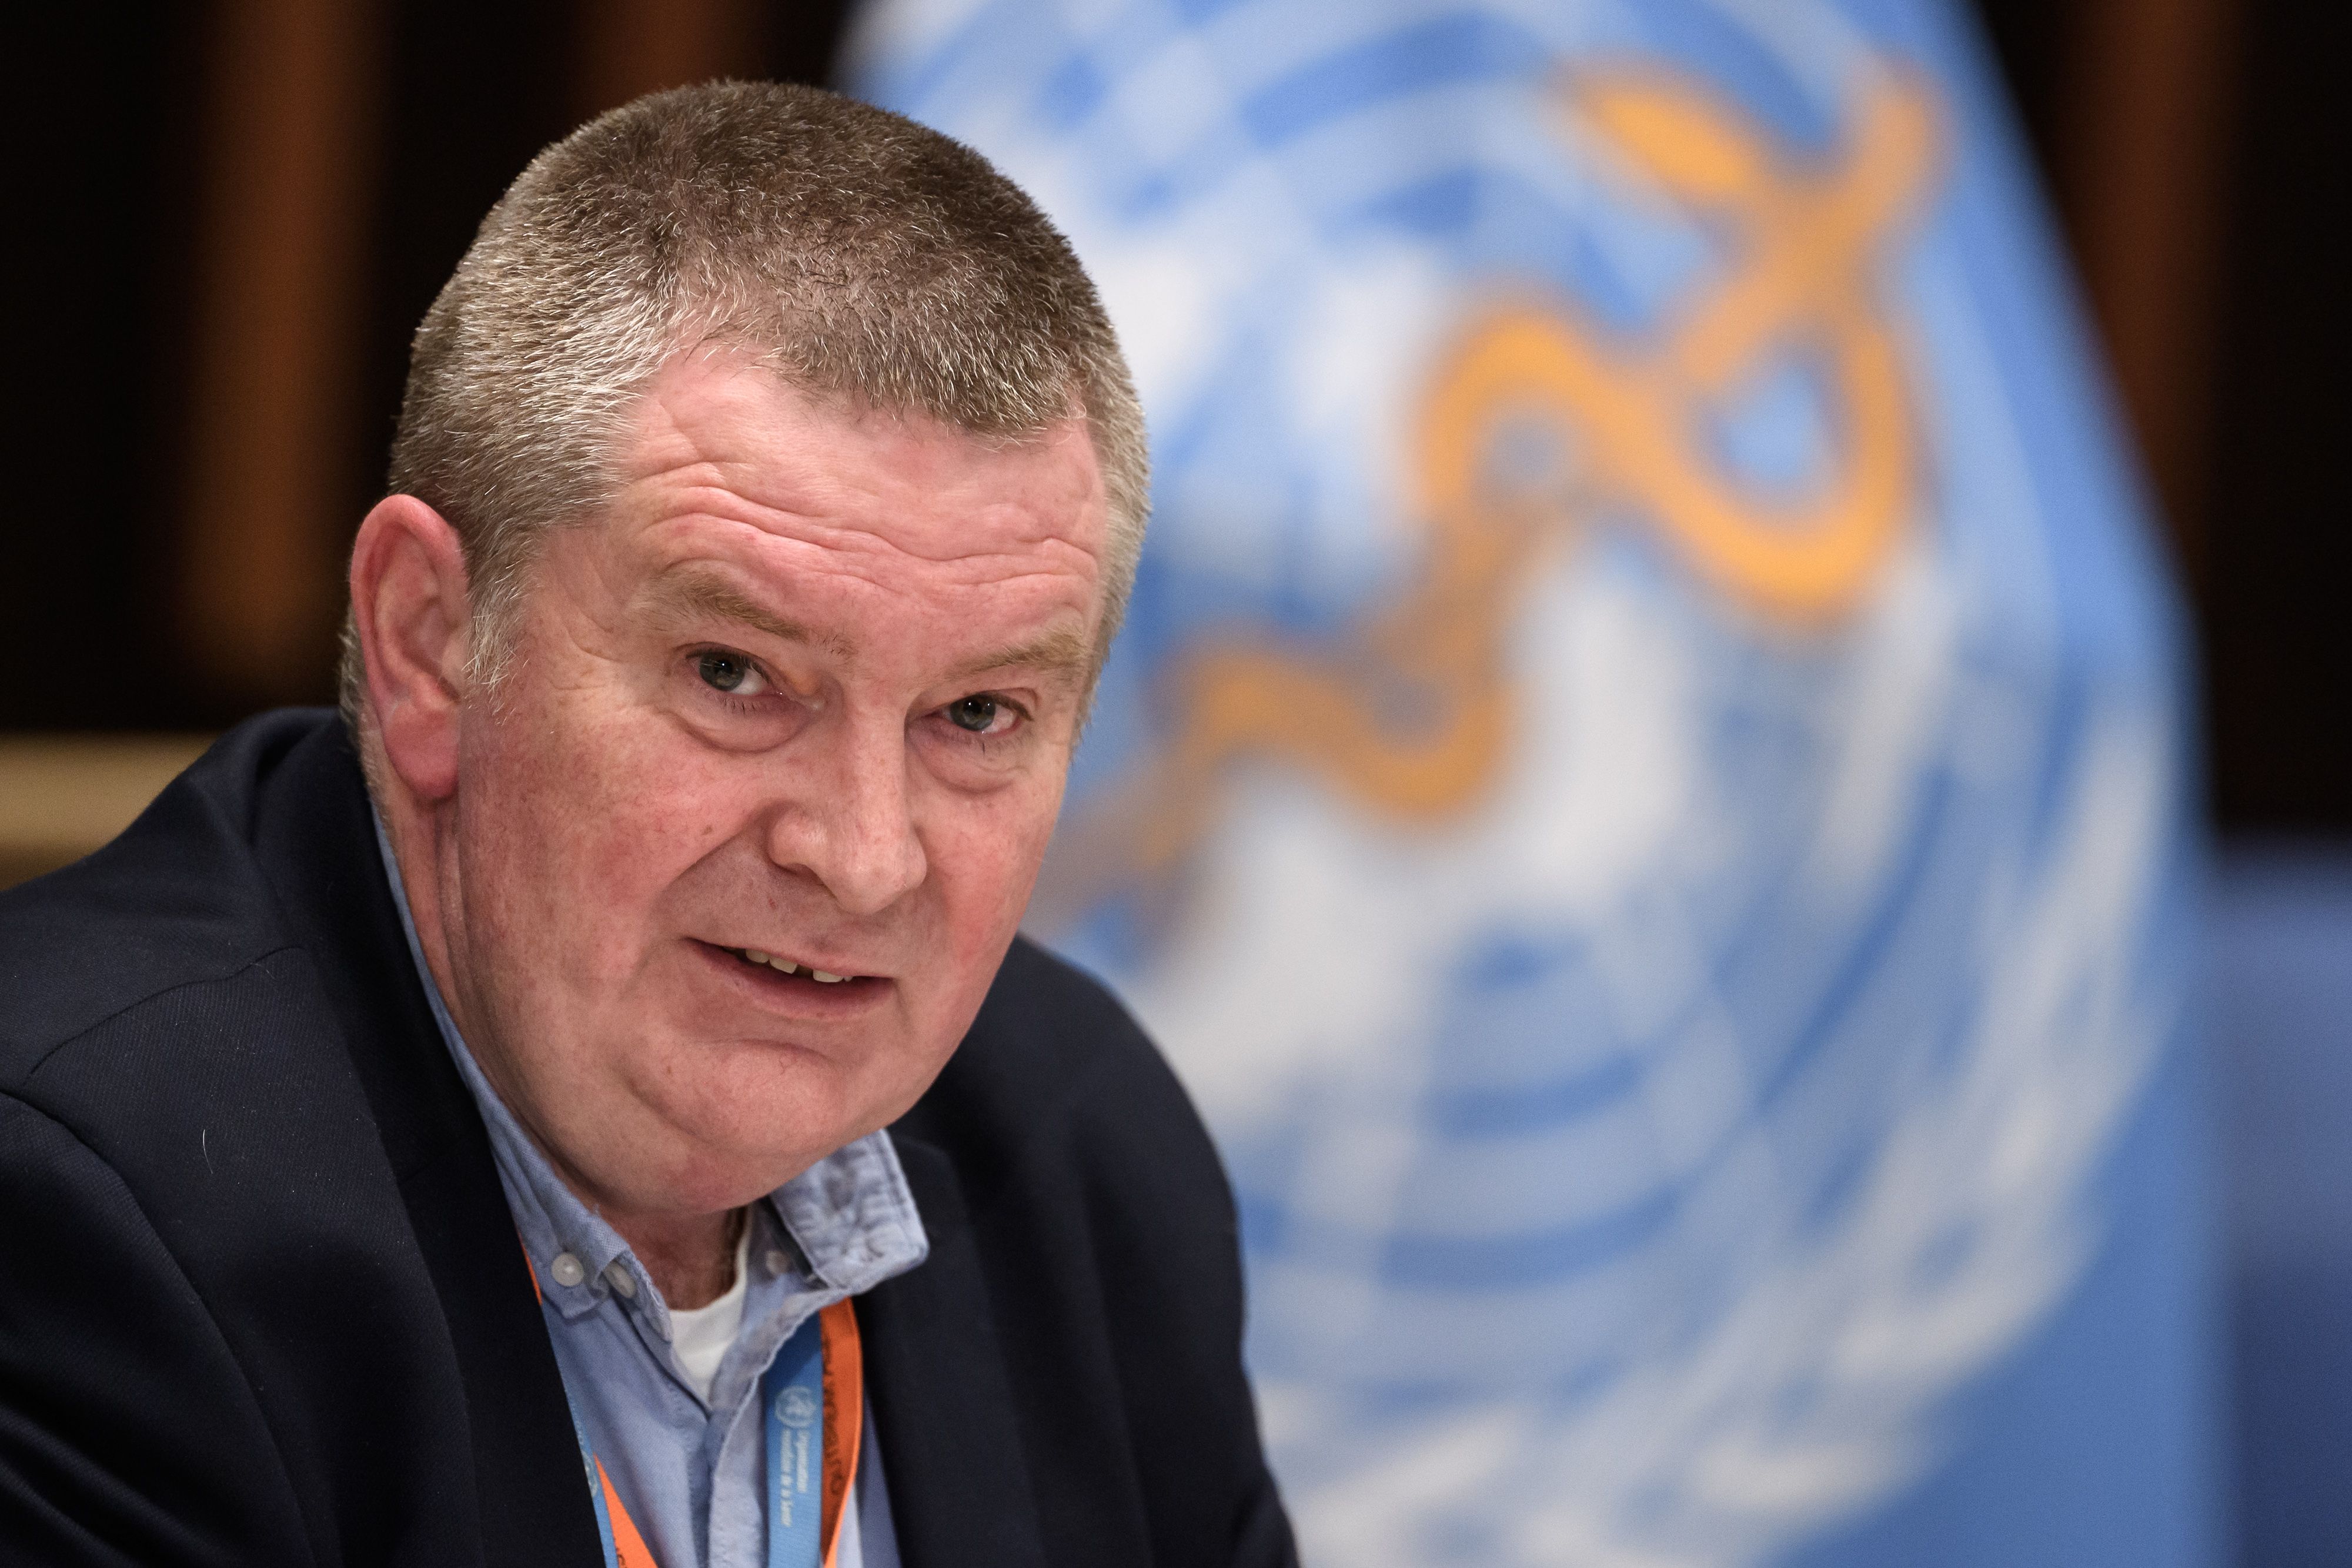 WHO Health Emergencies Programme Director Michael Ryan attends a press conference on July 3 at the WHO headquarters in Geneva, Switzerland. 